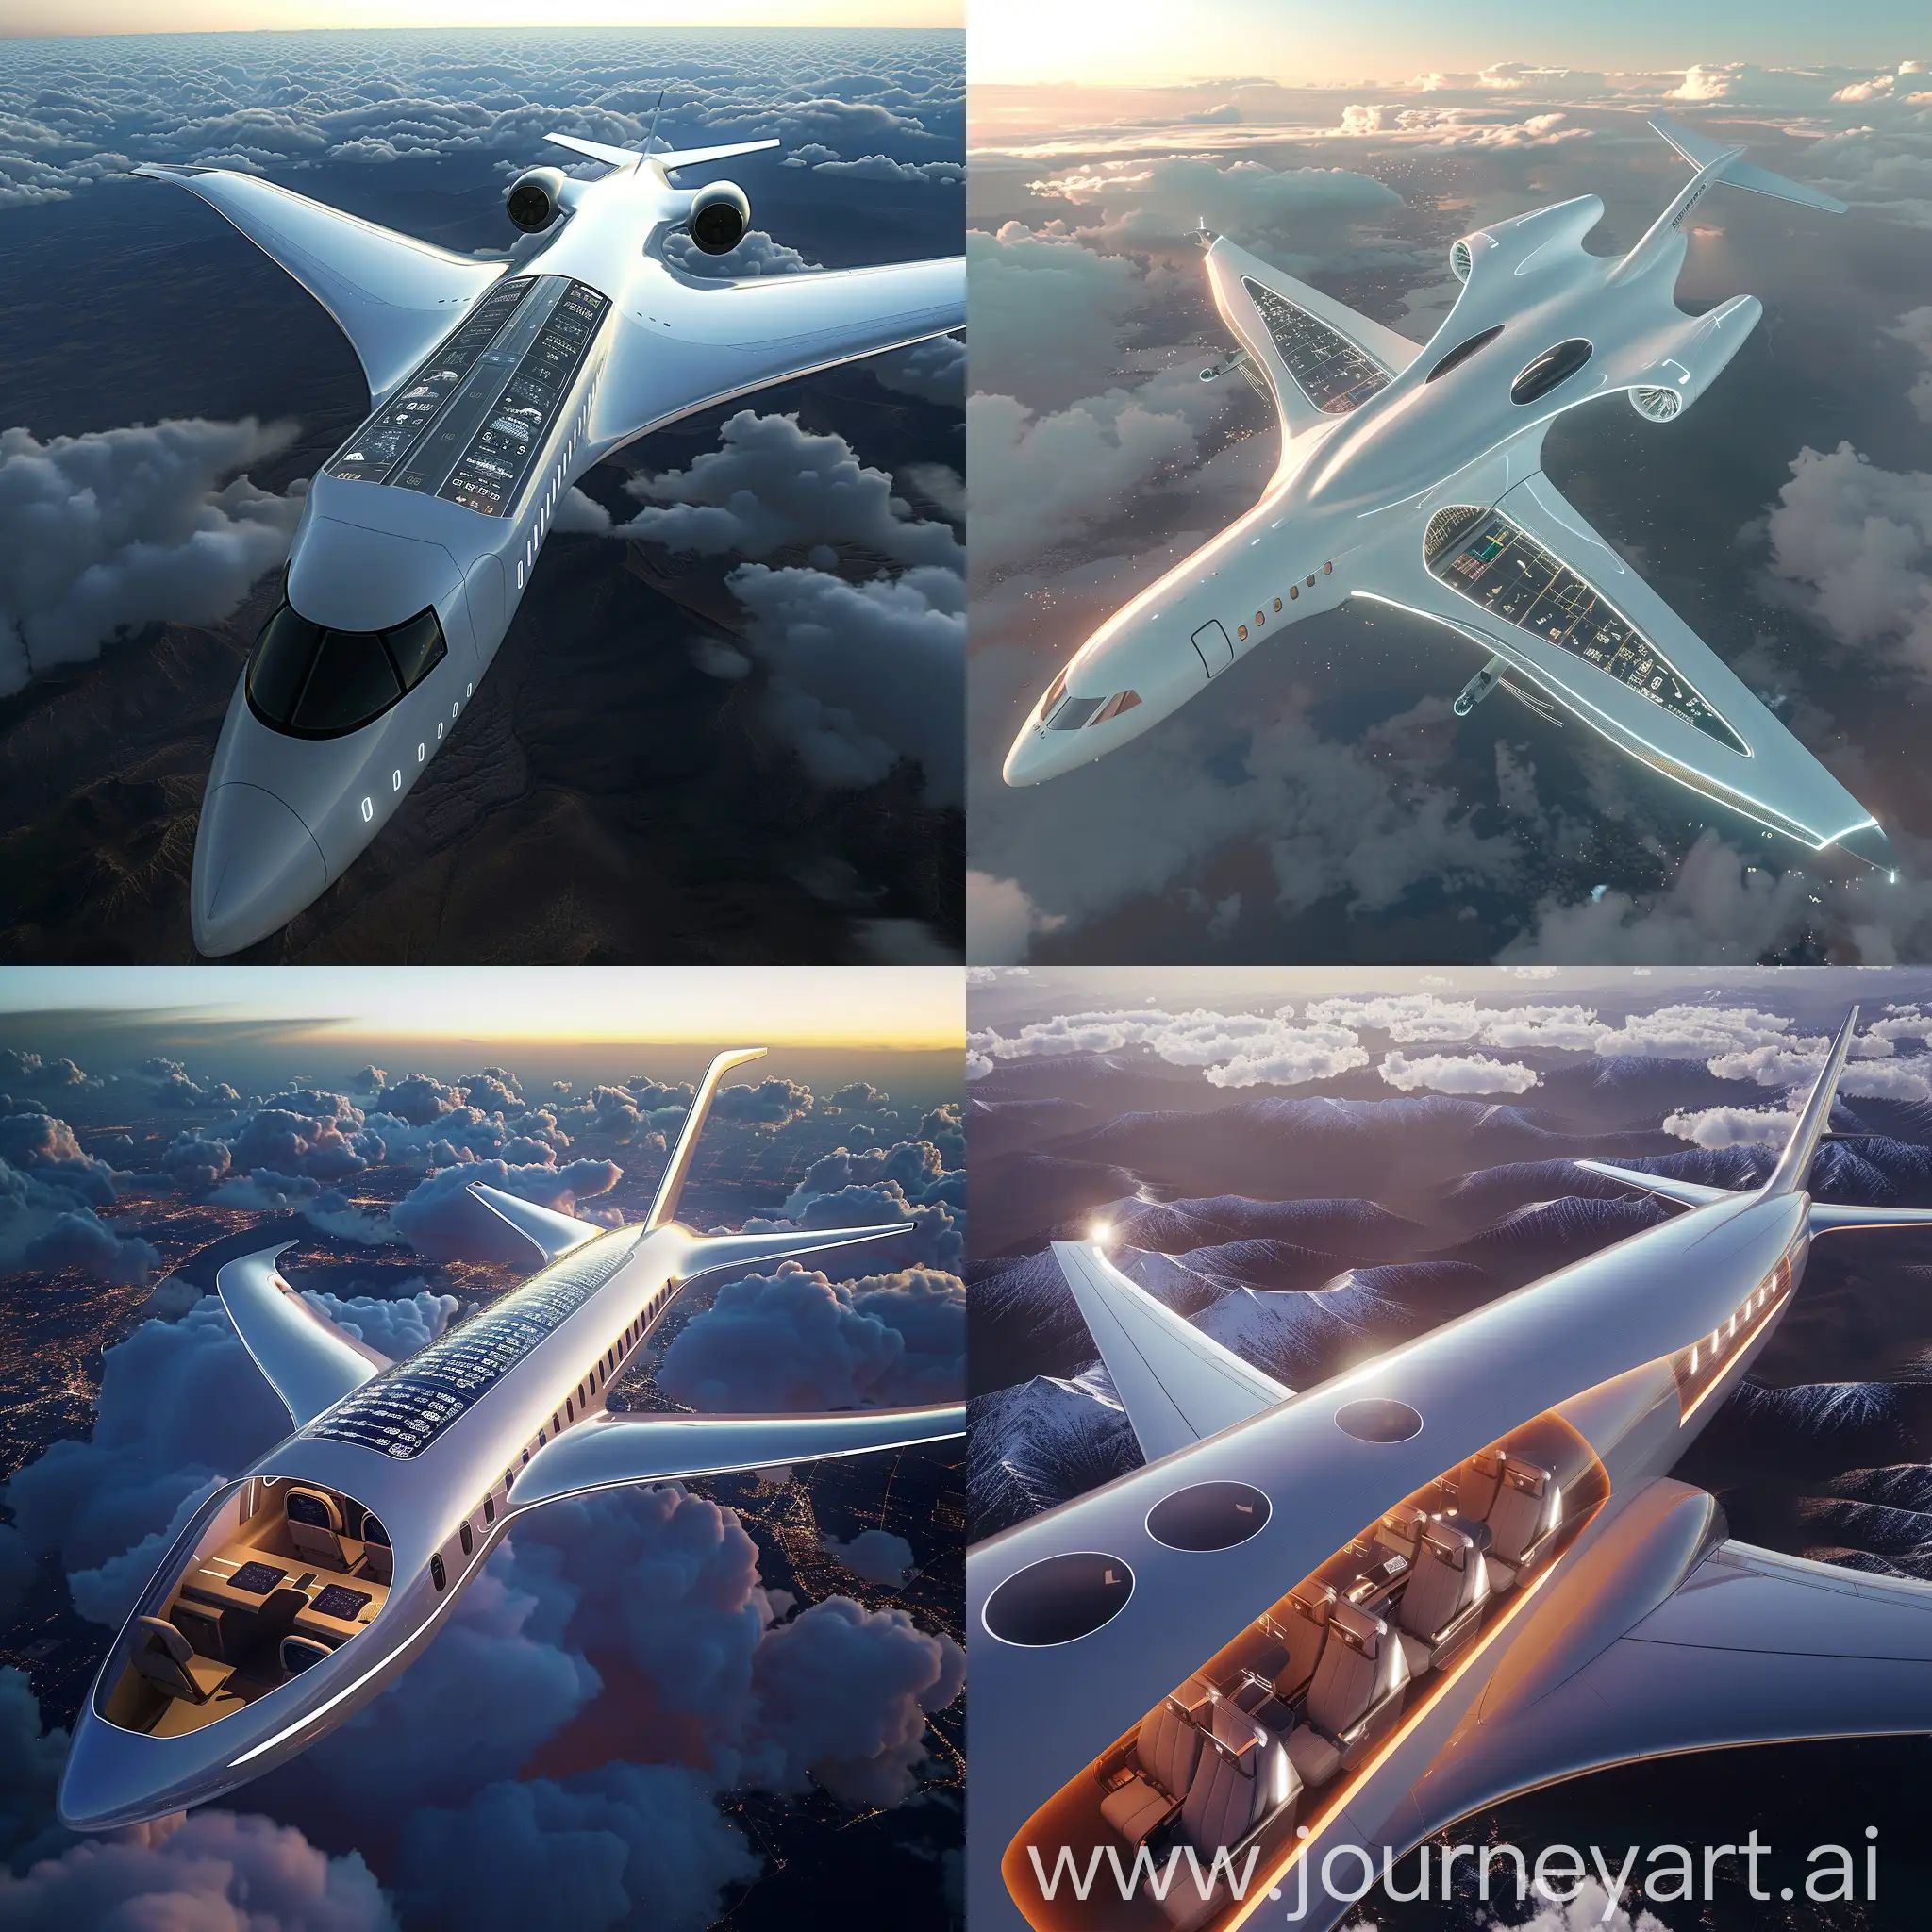 Futuristic passenger aircraft, in futuristic style, Virtual Reality (VR) Entertainment Systems, Biometric Authentication, Smart Cabin Materials, Adaptive Seating, Health Monitoring Systems, Integrated Sustainable Solutions, Augmented Reality (AR) Flight Information, Personalized Ambient Lighting, Air Quality Enhancement Systems, Modular Cabin Configurations, Blended Wing Body (BWB) Design, Variable Geometry Wings, Active Flow Control, Embedded Sensors for Structural Health Monitoring, Advanced Composite Materials, Electric Propulsion Systems, Active Noise Reduction Technology, Integrated Sensor Fusion for Enhanced Situational Awareness, Advanced Anti-Icing Systems, Sustainable Paint and Coatings, 8K Ultra HD In-Flight Entertainment (IFE) Screens, Interactive Touchscreen Seat Controls, Virtual Reality (VR) Headsets with 8K Displays, 8K Video Conferencing Systems, Innovative Cabin Projection Systems, Augmented Reality (AR) Navigation Guides, Personal 8K Content Streaming, High-Resolution Flight Information Displays, 8K Ultra HD SkyCeiling Windows, Customizable Ambient Lighting with 8K Visualization, 8K Ultra HD Exterior Cameras, Real-Time External Monitoring Displays, Virtual Exterior Windows with 8K Displays, Integrated Exterior Lighting Systems, Augmented Reality (AR) External Navigation Guides, Dynamic Exterior Advertising Panels, Integrated Environmental Sensors, High-Resolution Exterior Graphics and Liveries, Advanced Exterior Maintenance Inspection Systems, Interactive Passenger Communication Displays, unreal engine 5 --stylize 1000